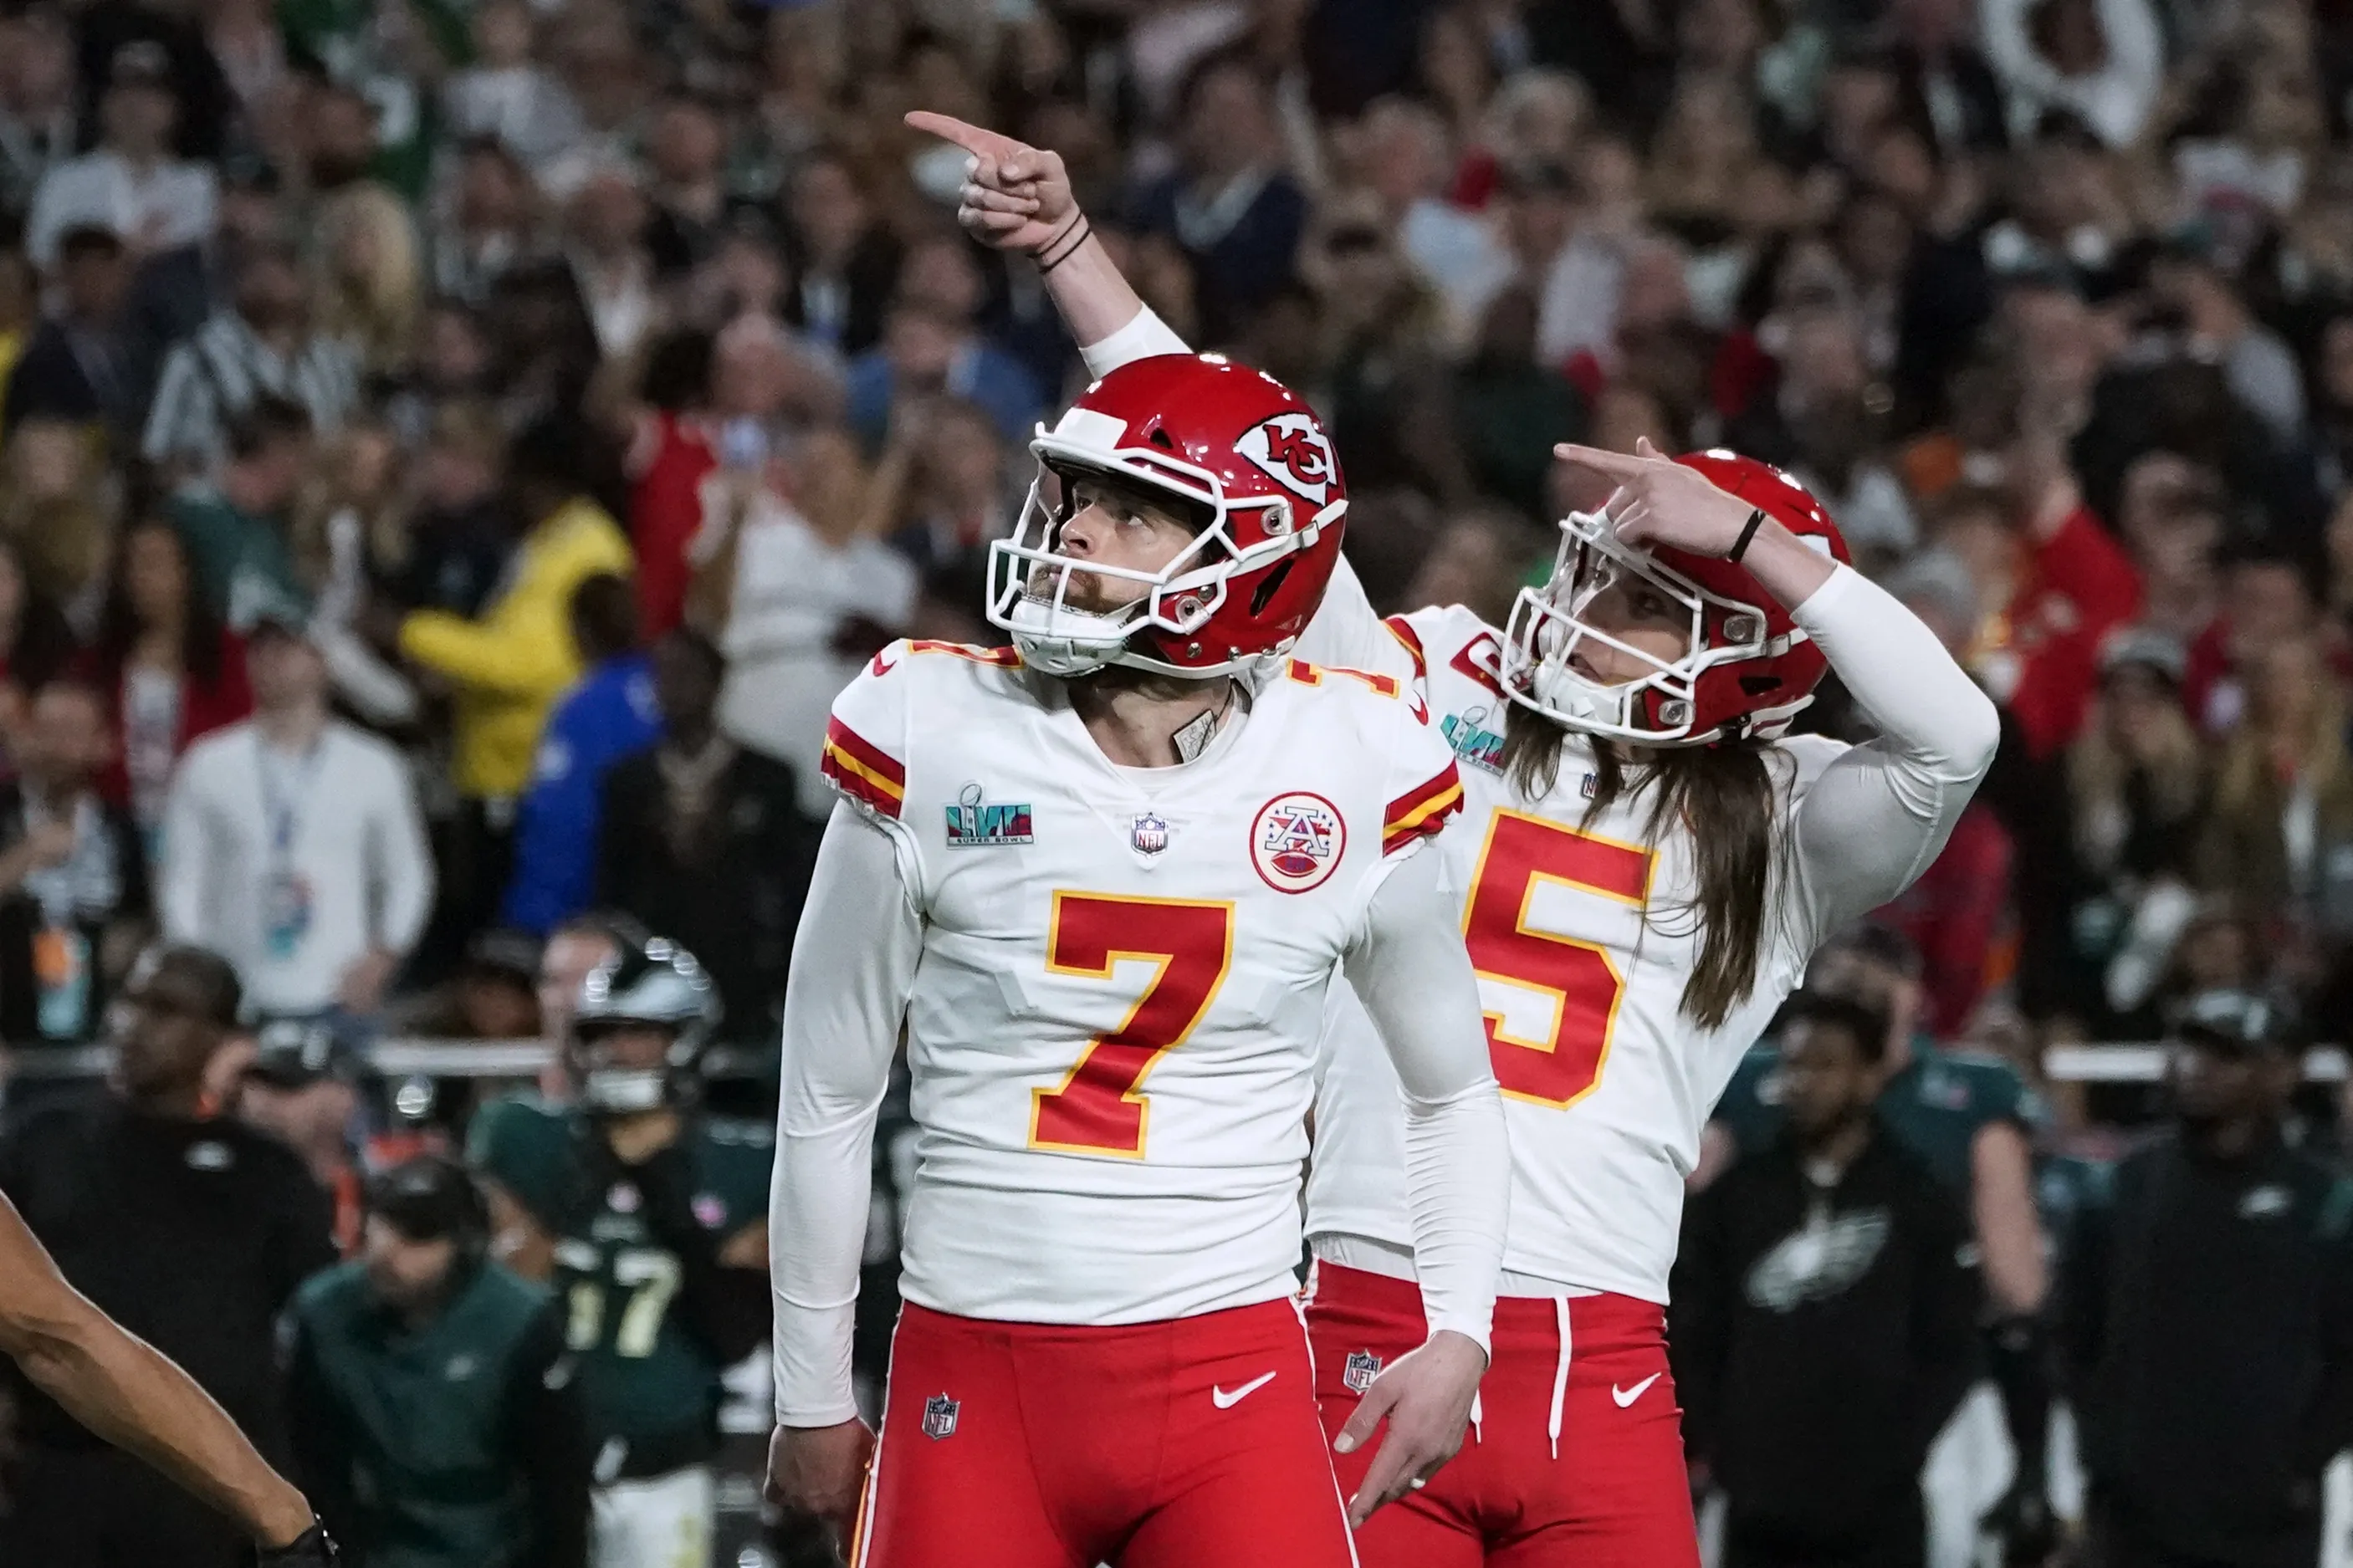 Chiefs News 2/13: The Chiefs are your Super Bowl Champions - Arrowhead Pride